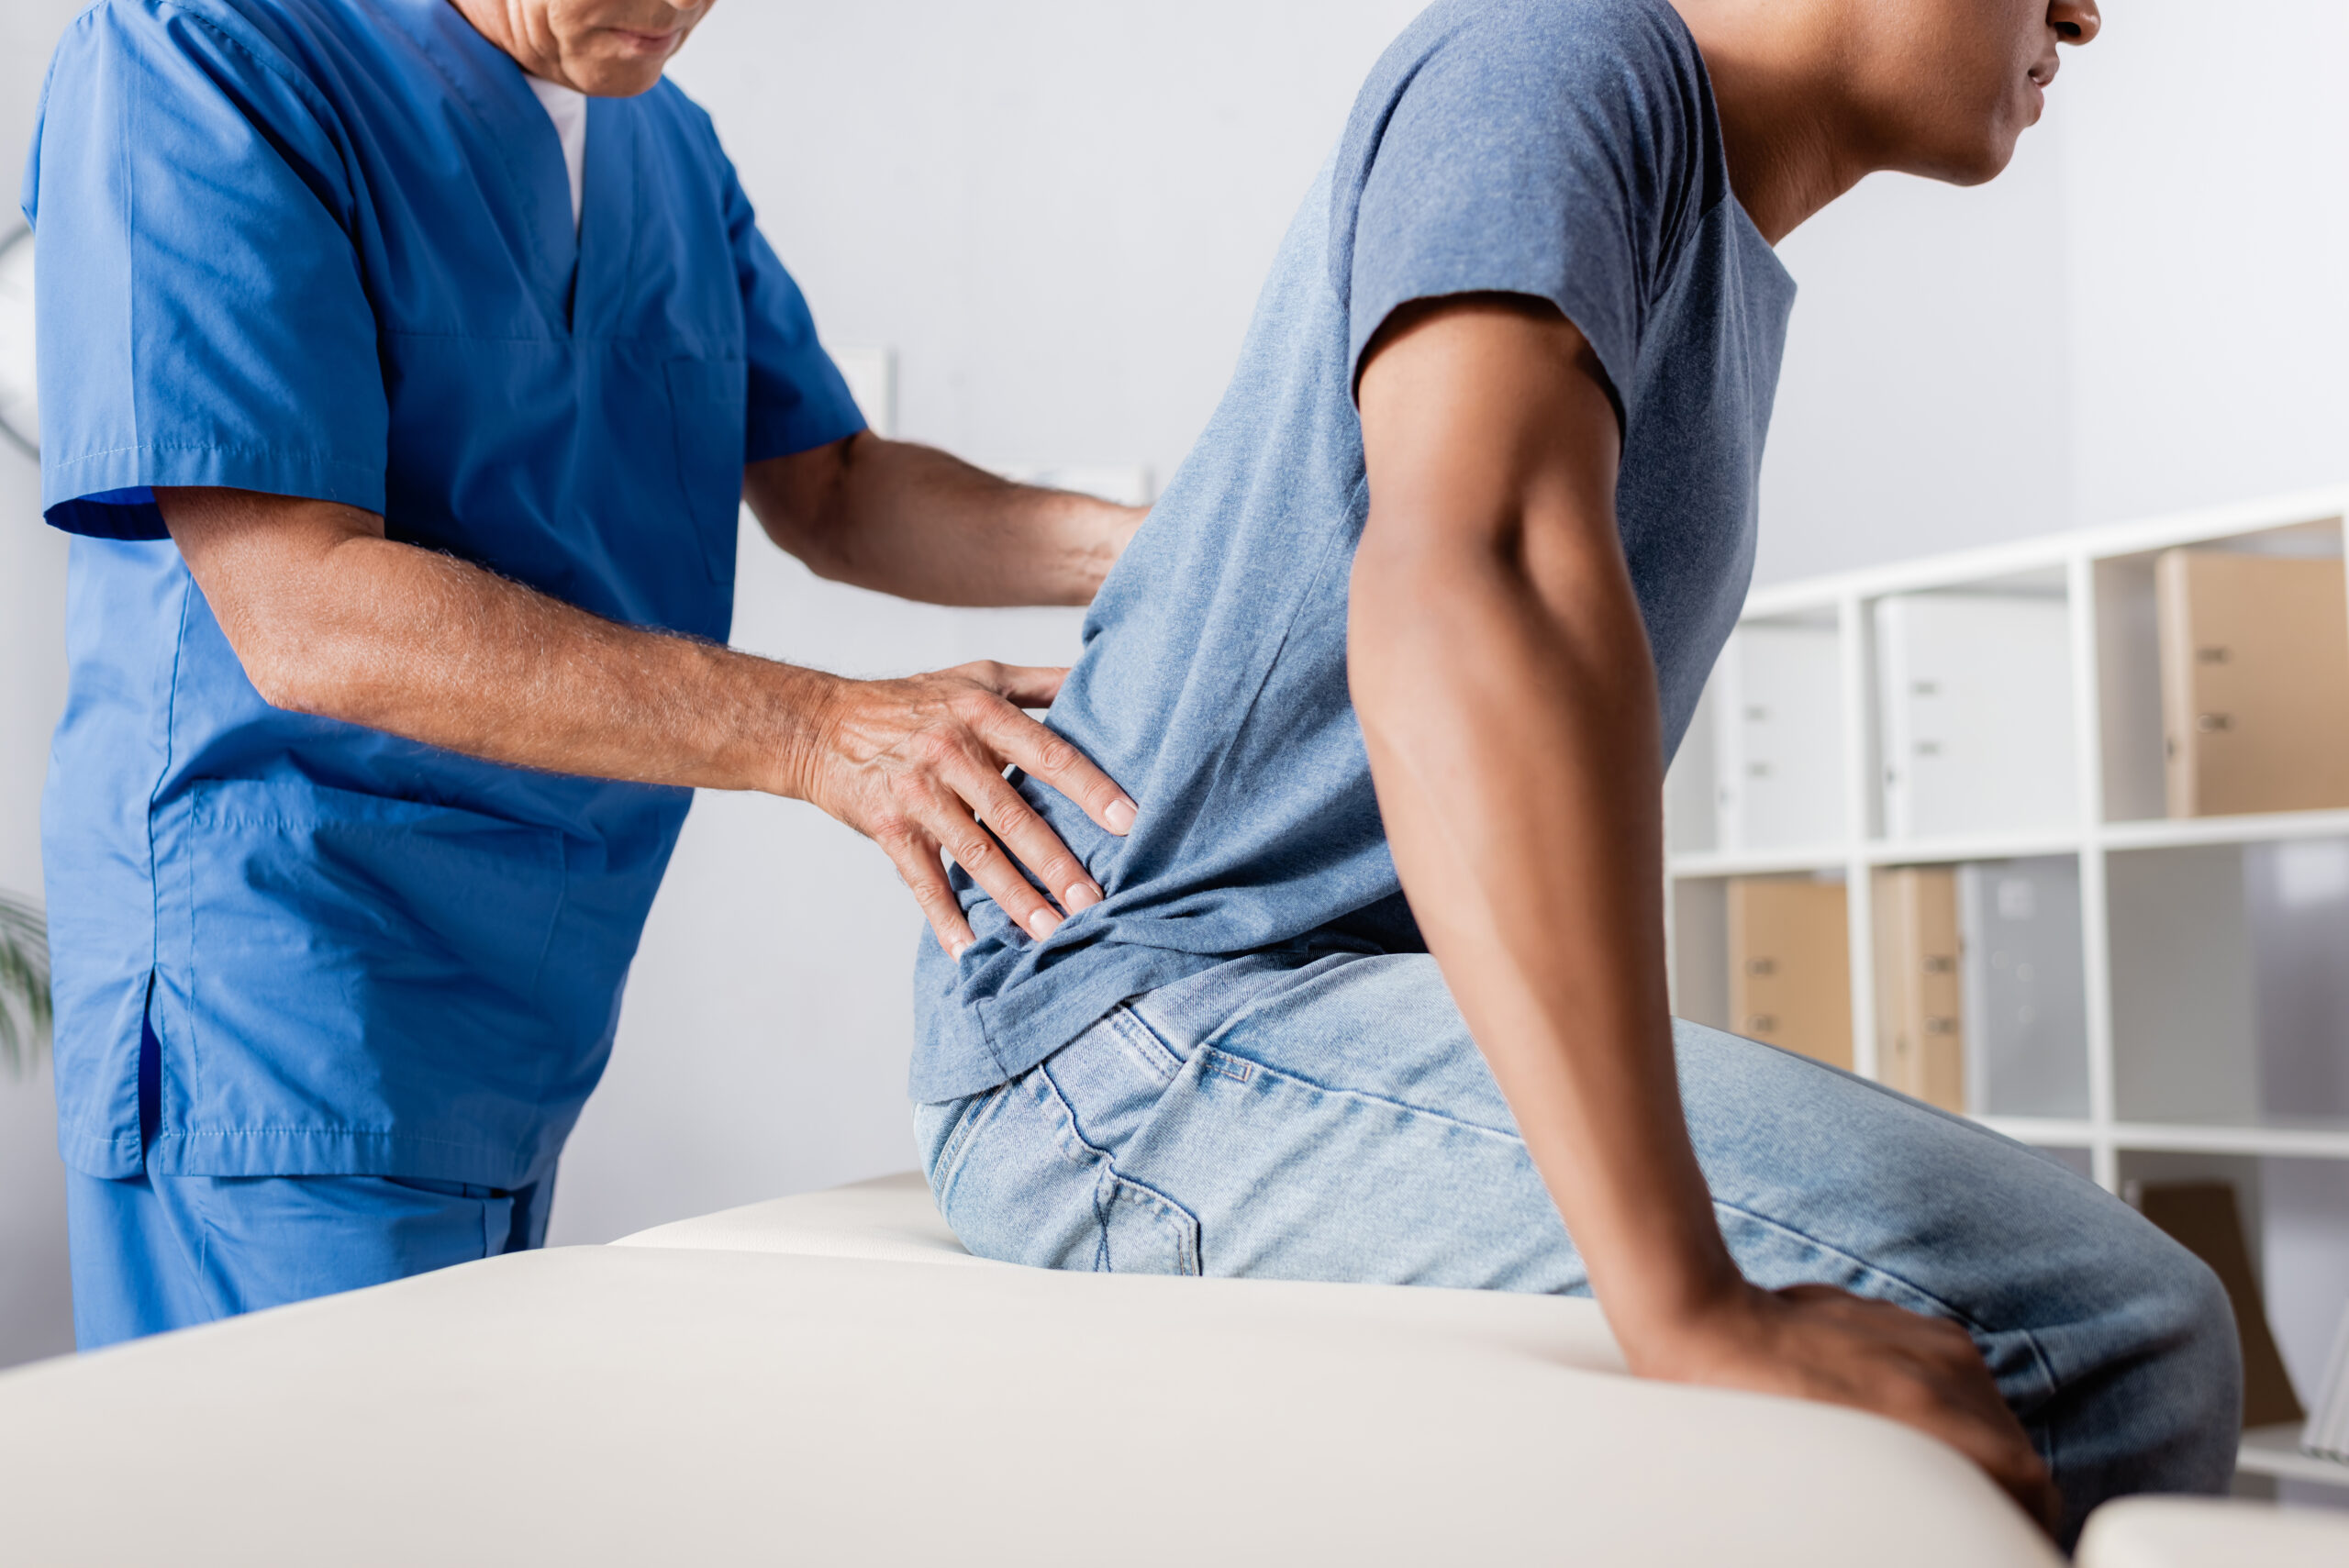 physical therapist working with man on low back pain relief